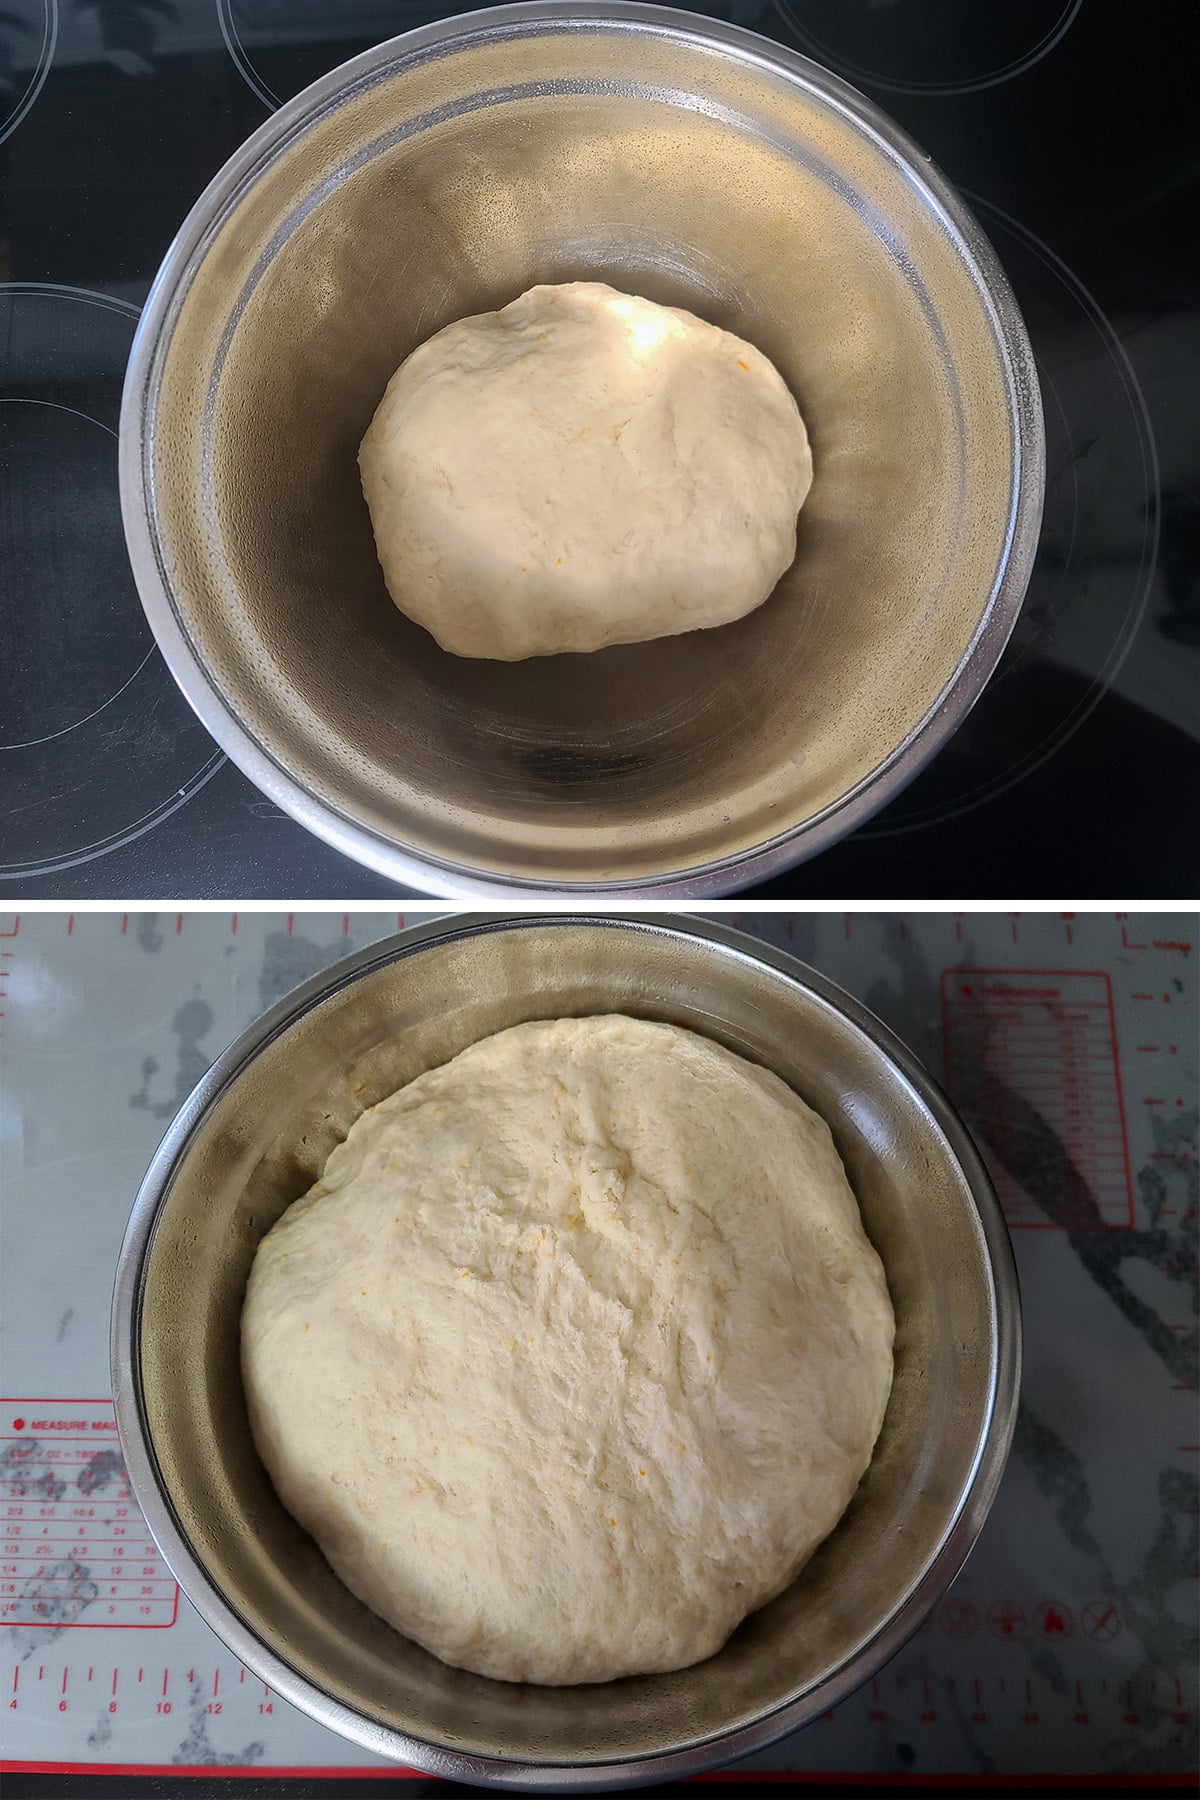 A 2 part image showing the dough ball in a bowl, before and after doubling in size.